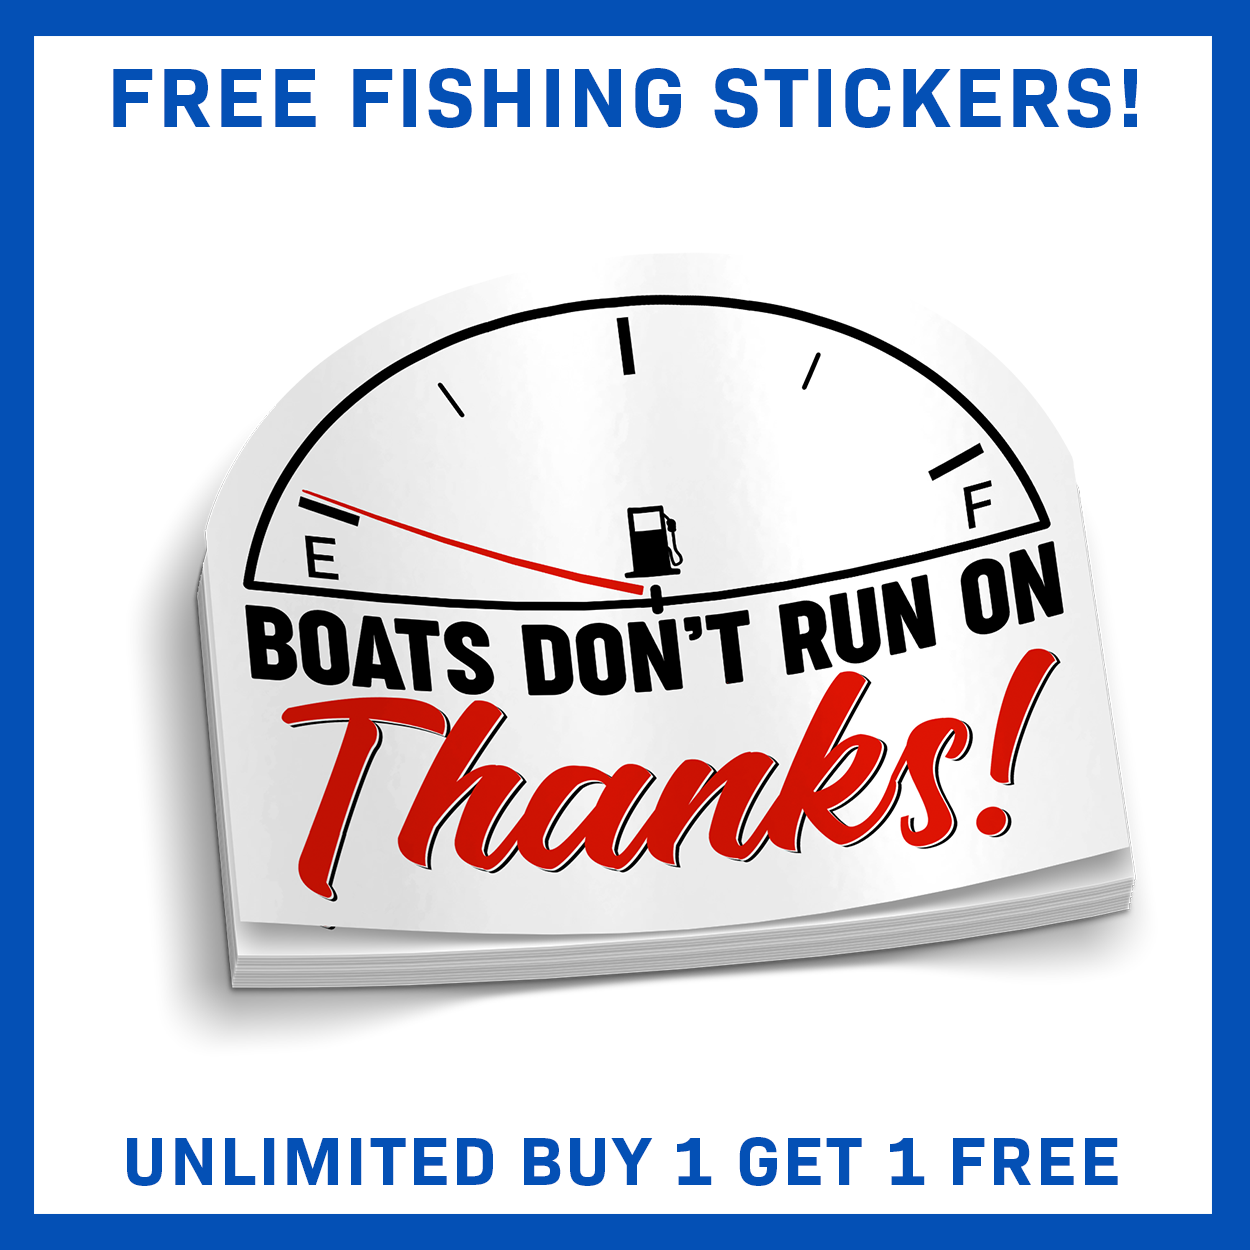 Fishing league / 6stickers ====> 50% discount • Also buy this artwork on  stickers, apparel, phone cases, and more.